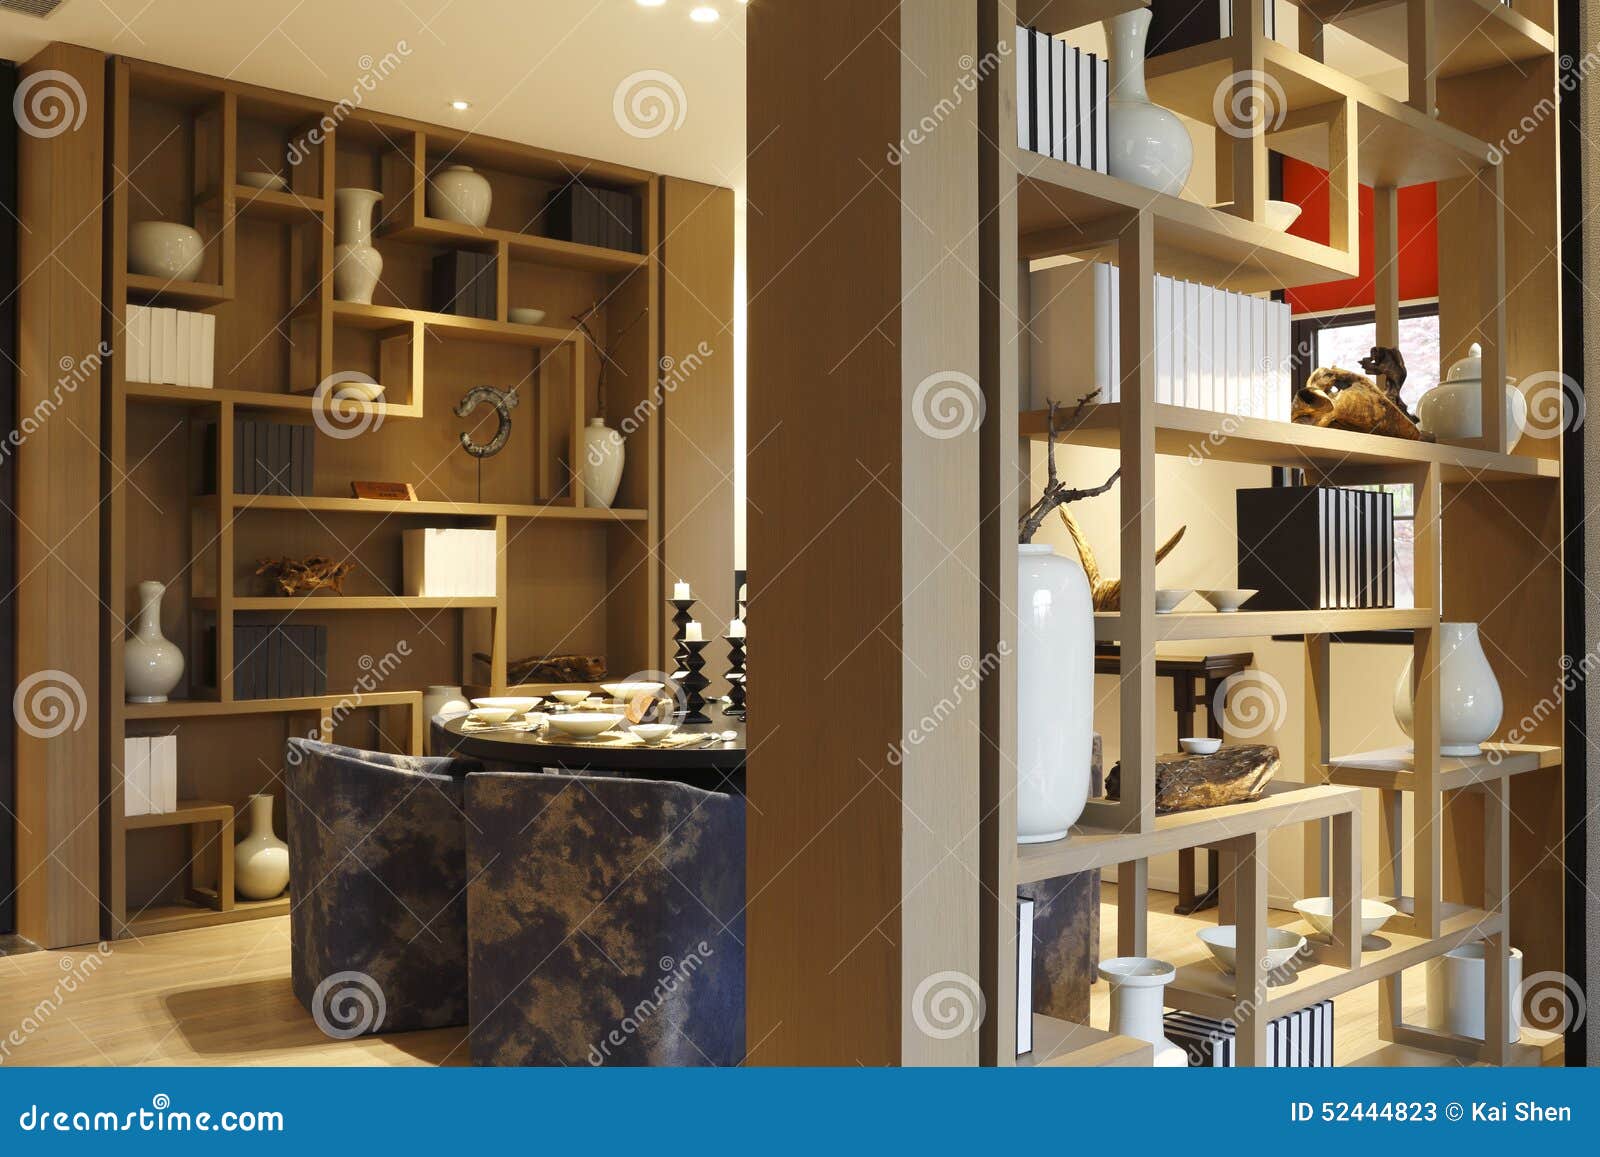 Between The Two Shelves Dining Room Table Stock Image Image Of